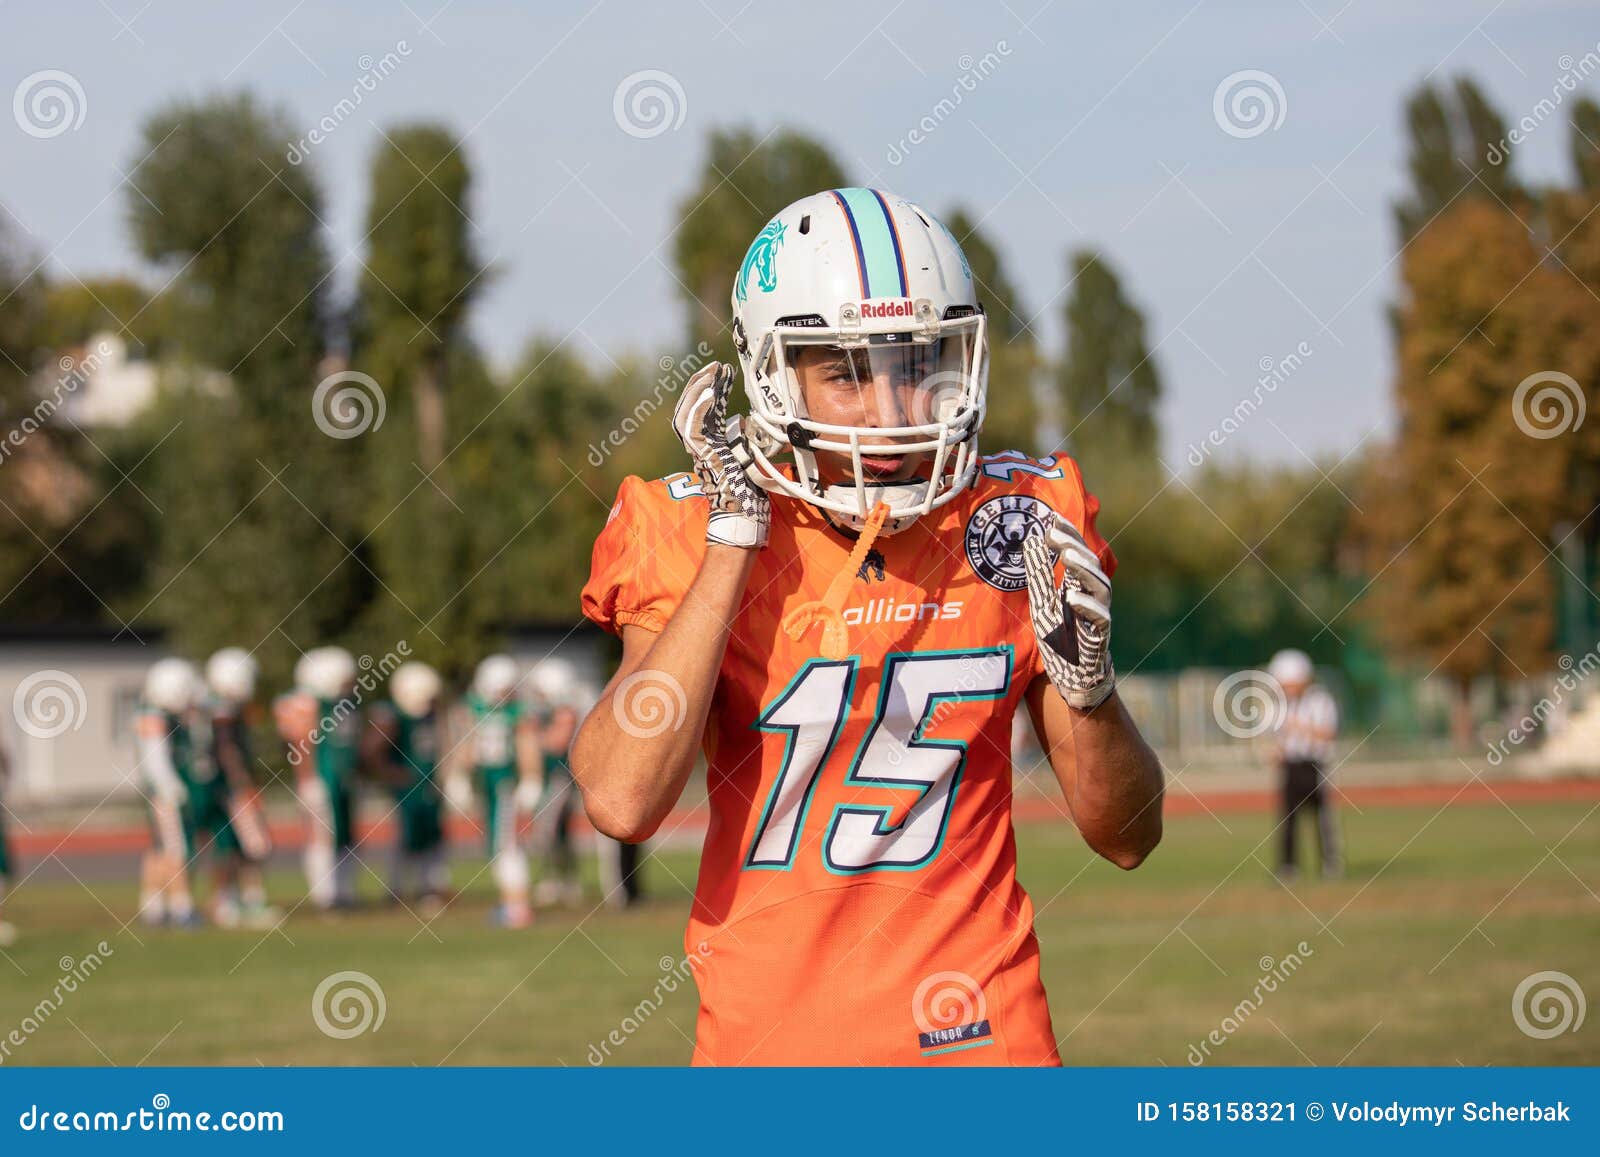 The American Football Game in the Stadium Editorial Photo Image of